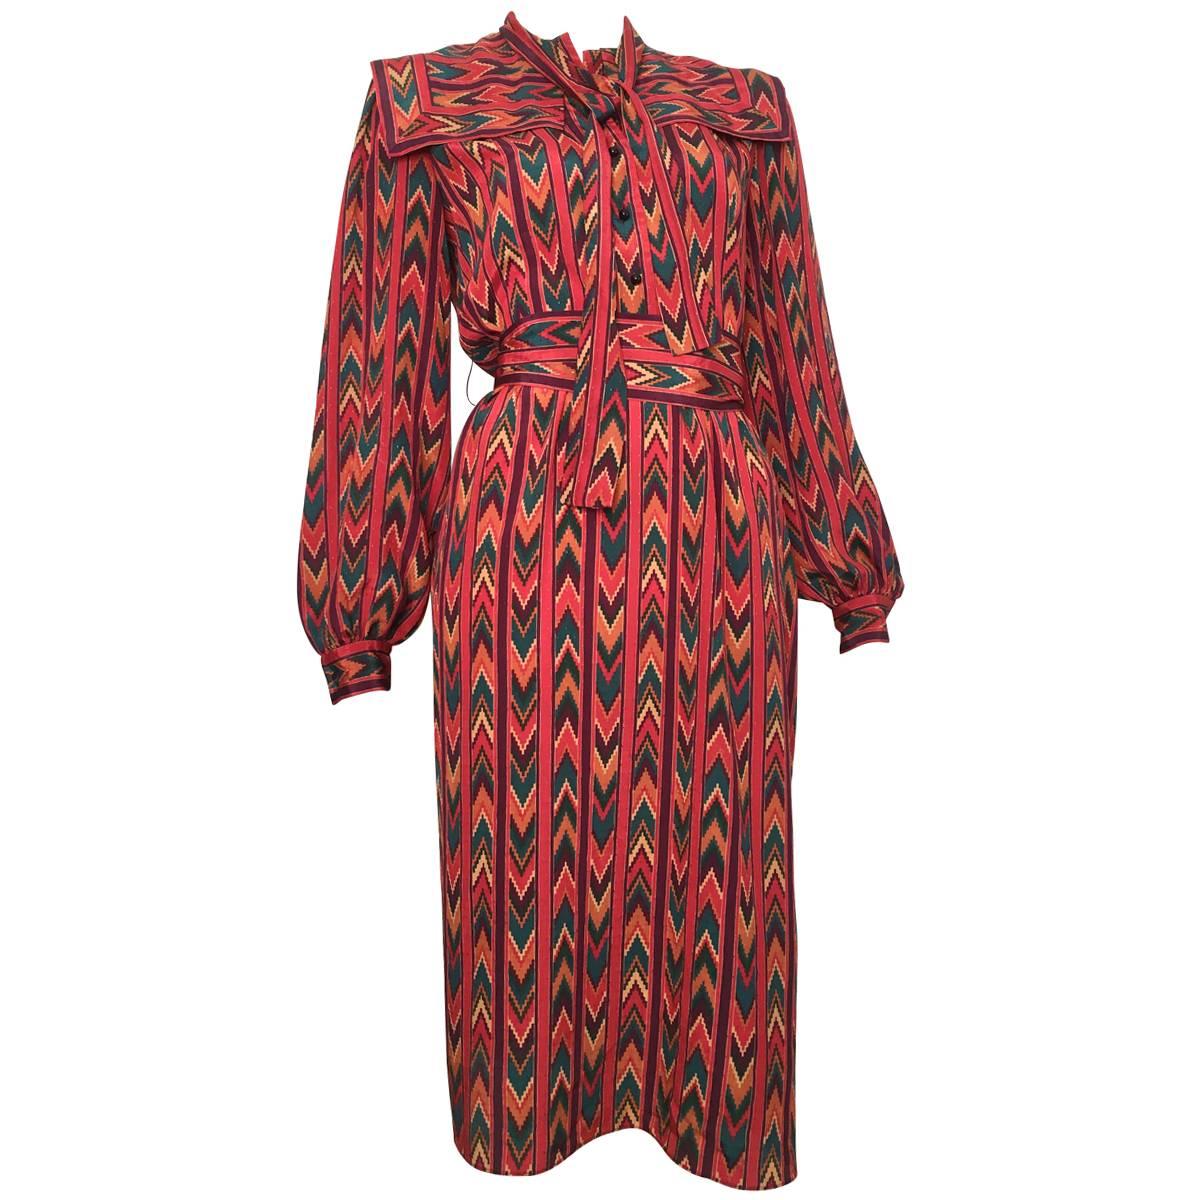 Molly Parnis 1980s Native American Print Dress Size 10. For Sale